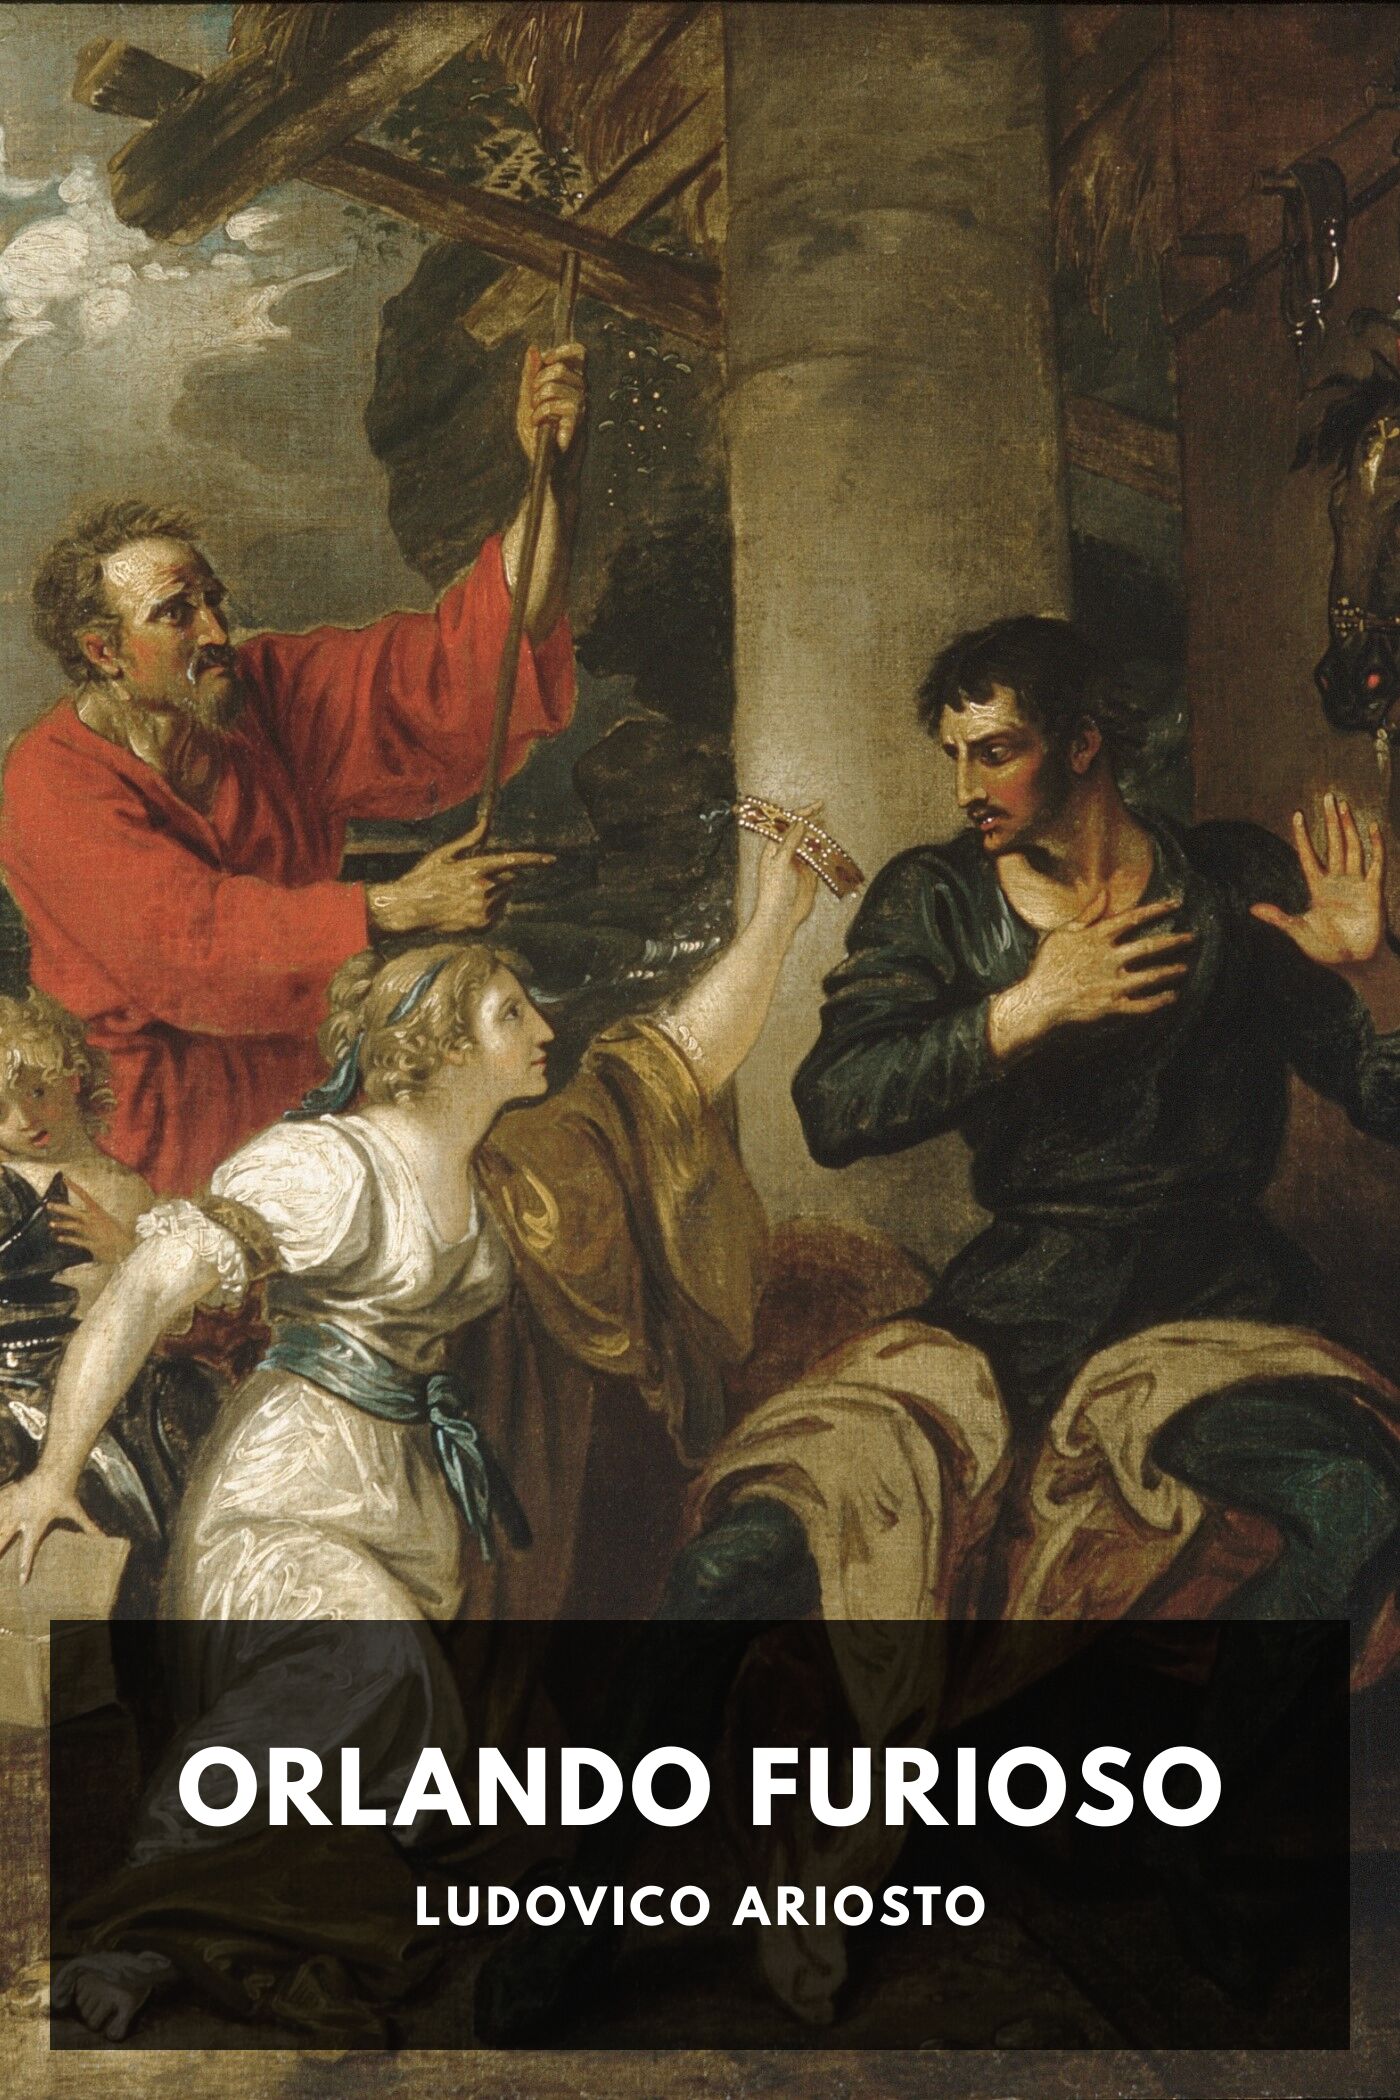 Orlando Furioso, by Ludovico Ariosto. Translated by William Stewart Rose -  Free ebook download - Standard Ebooks: Free and liberated ebooks, carefully  produced for the true book lover.